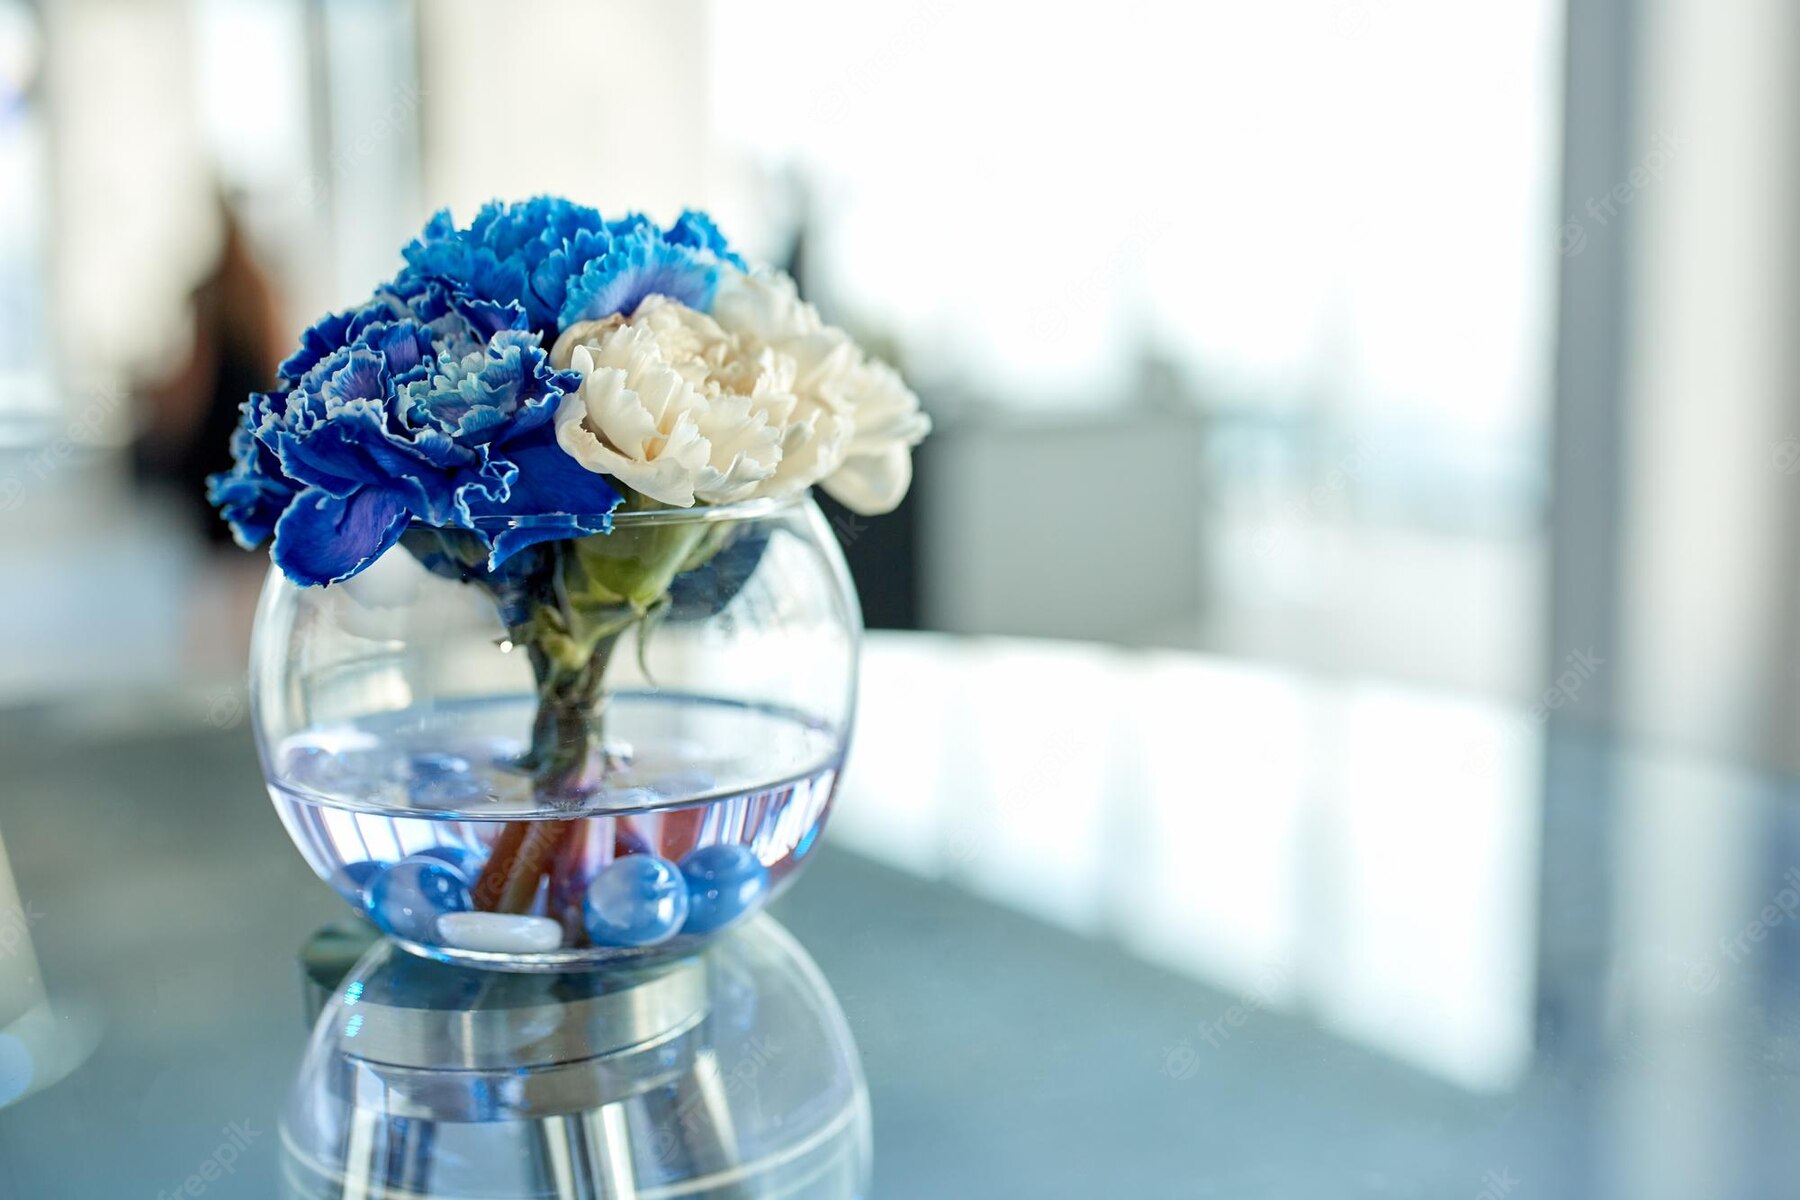 blue orchid flower in glass planter, blue petals, placed on table for room decor